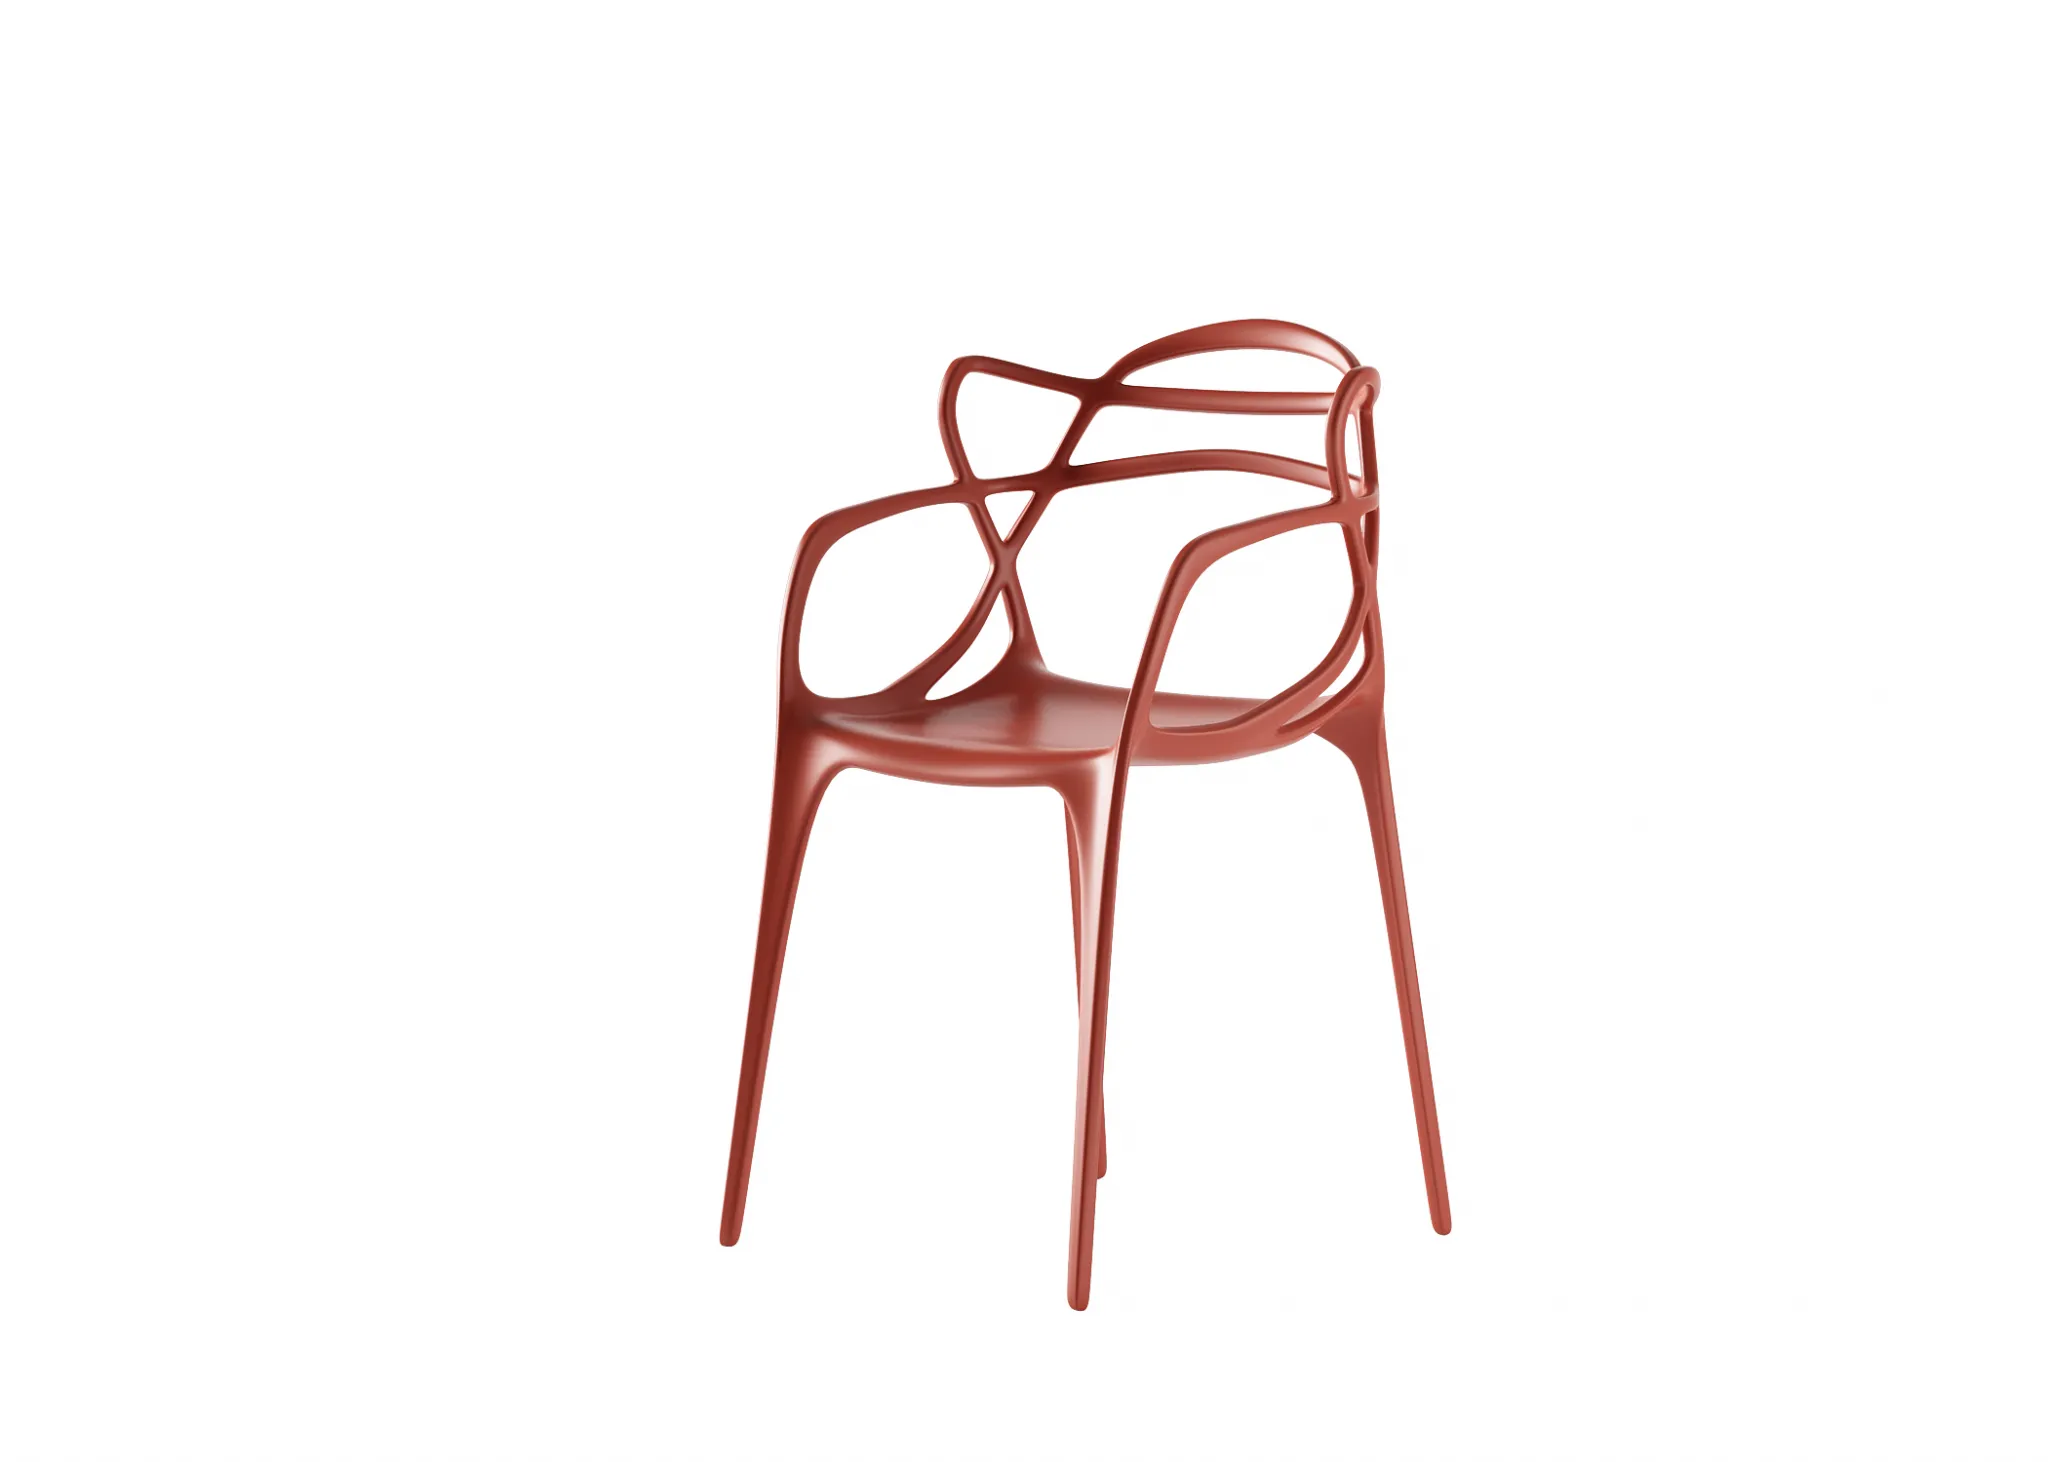 FURNITURE 3D MODELS – CHAIRS – 0344